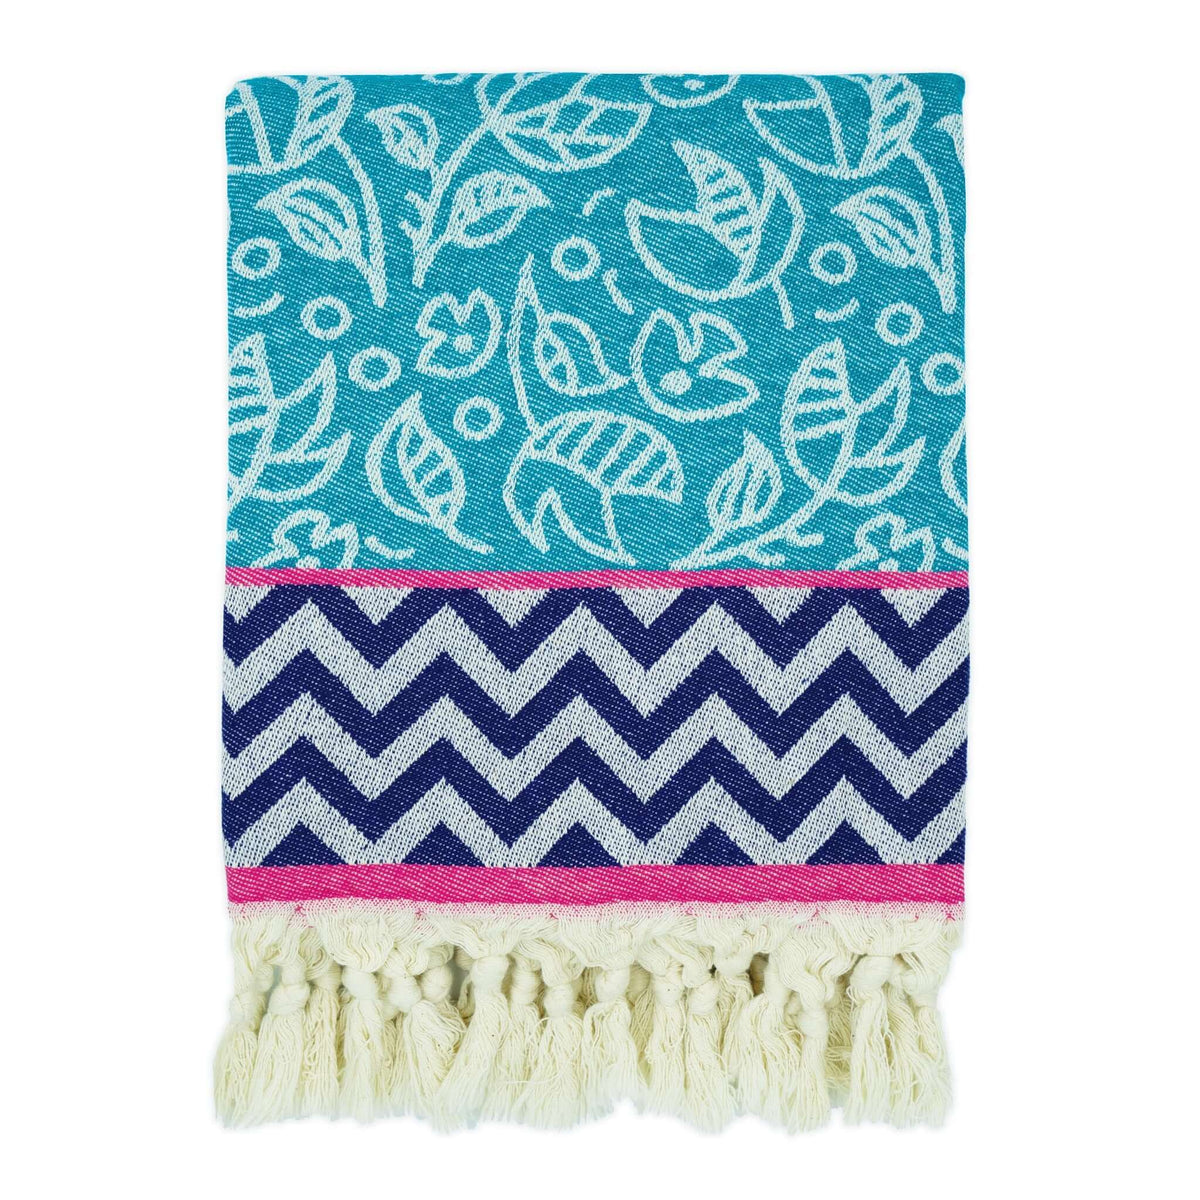 turkish towel tuquoise flower and navy blue zigzag pattern with tassels knots vibrant colours fun design designer fashinable